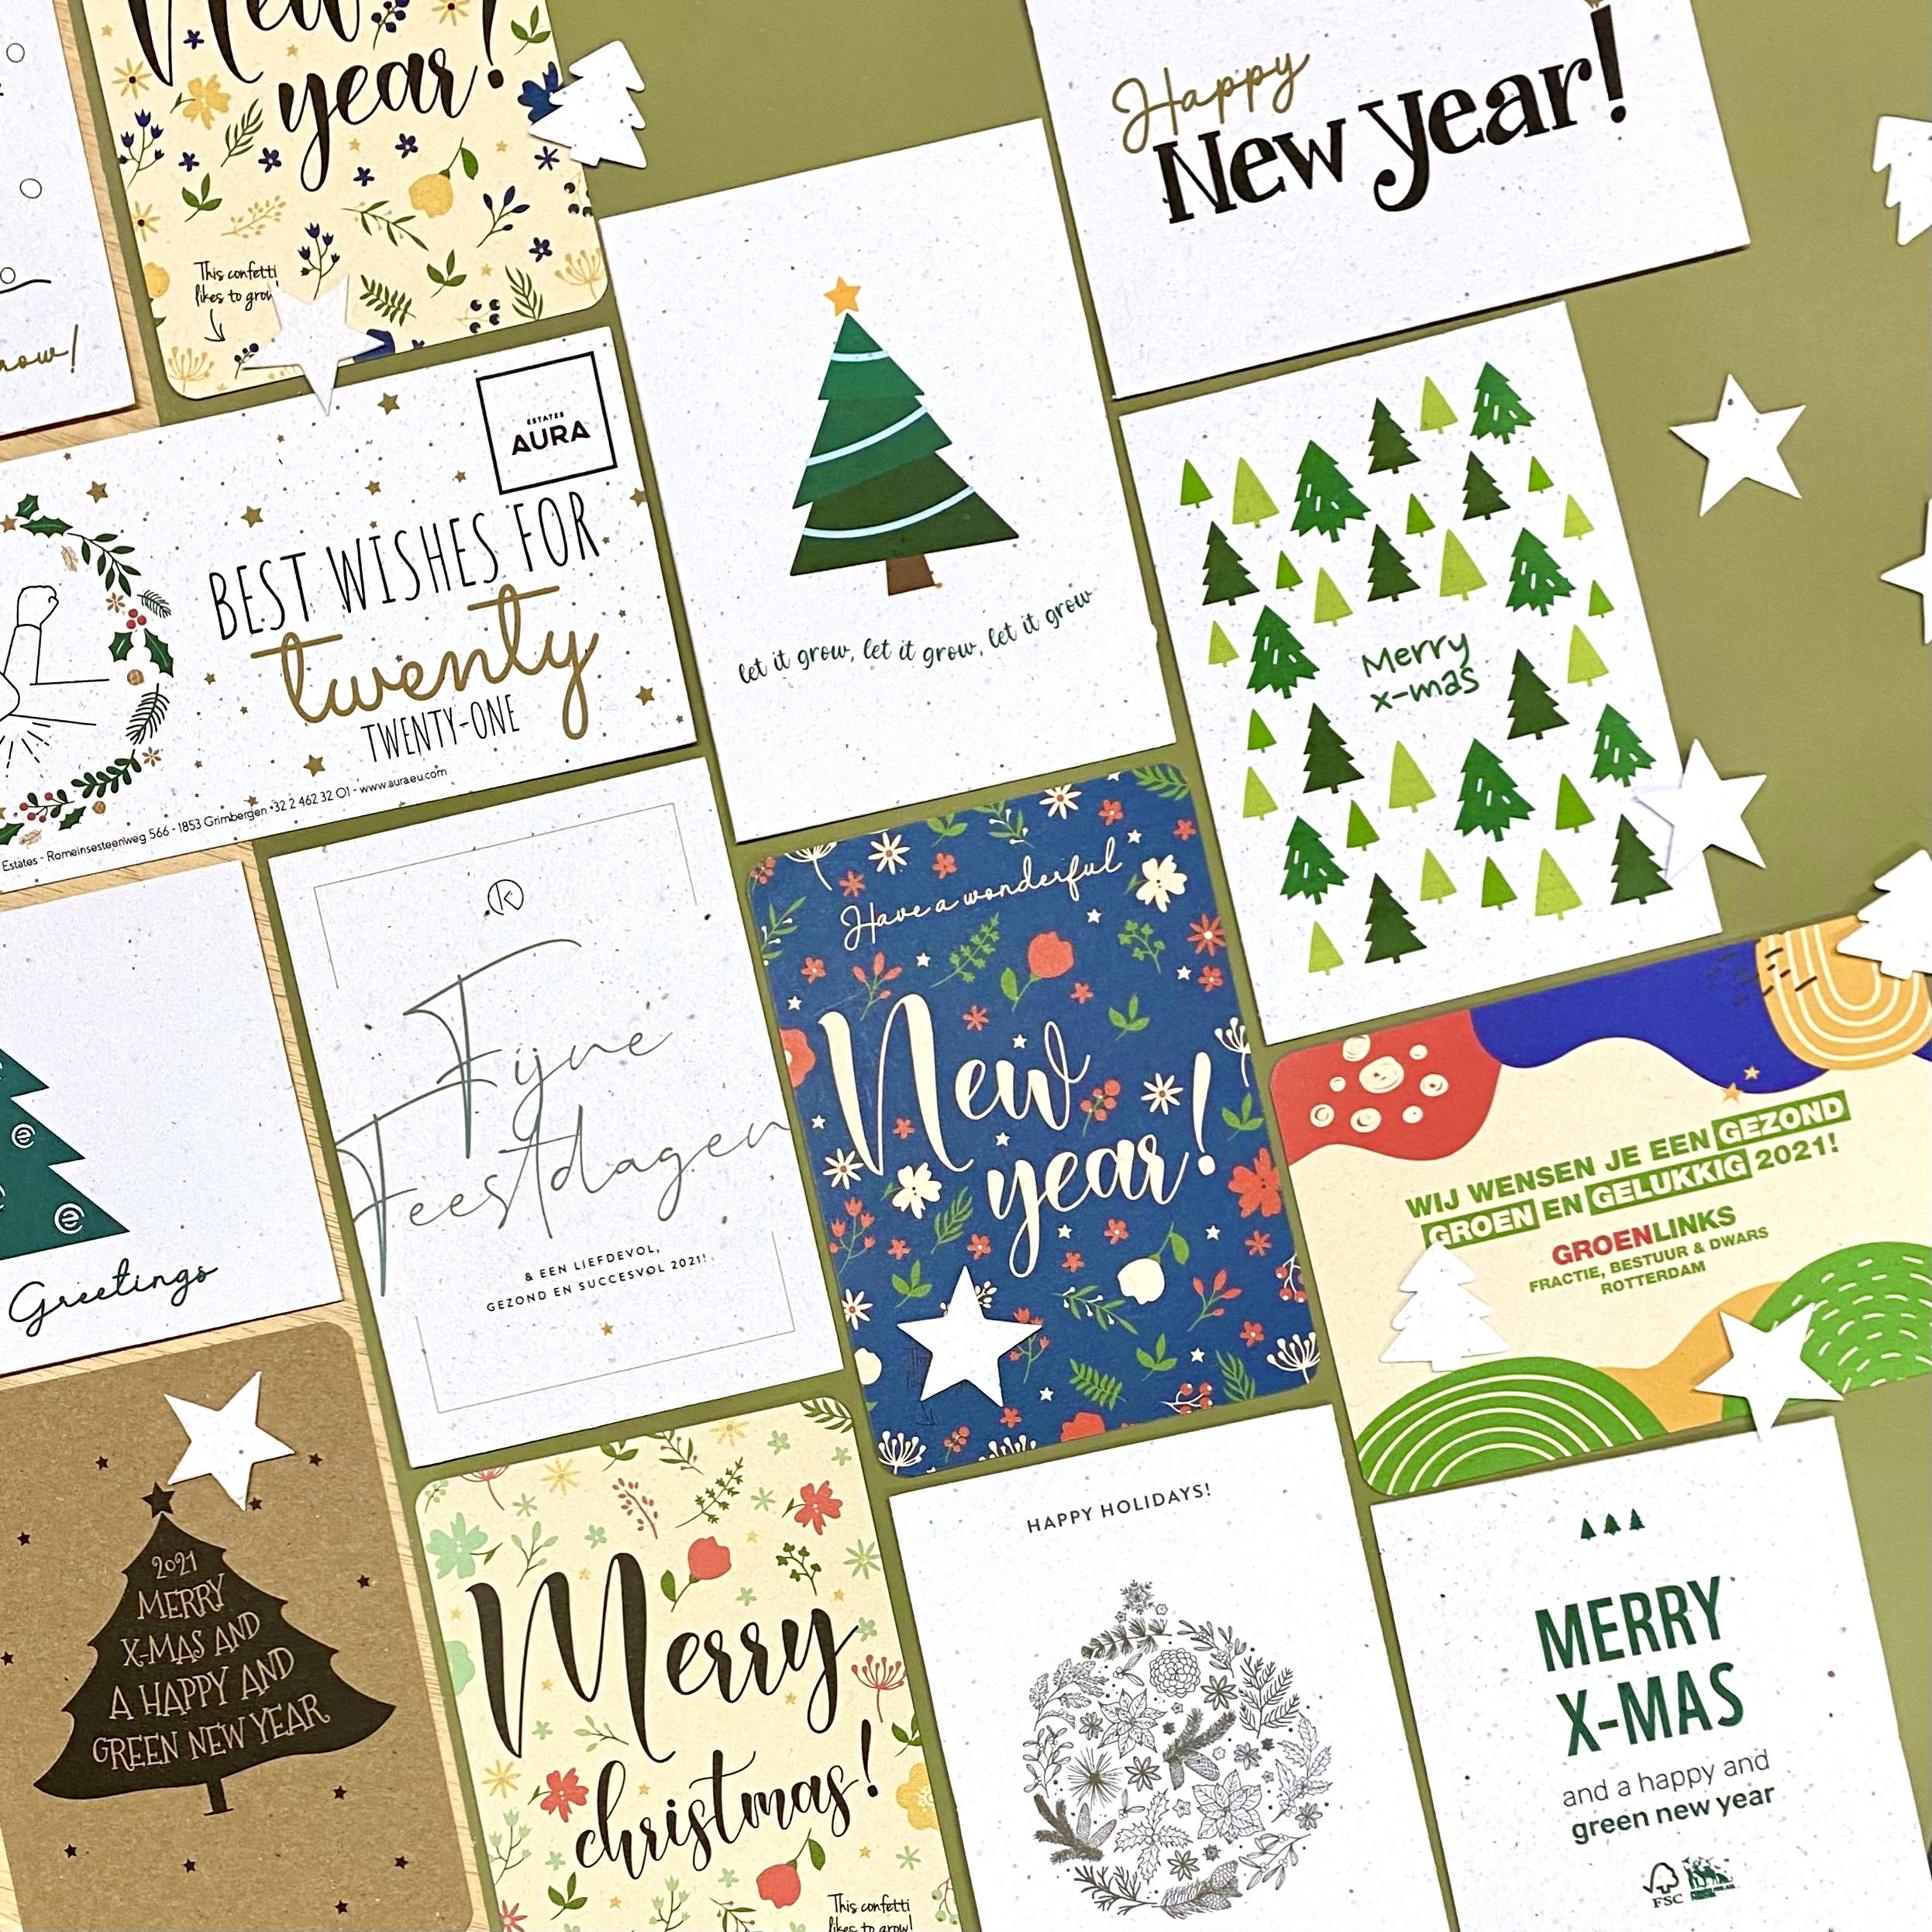 Plantable Christmas cards & gifts